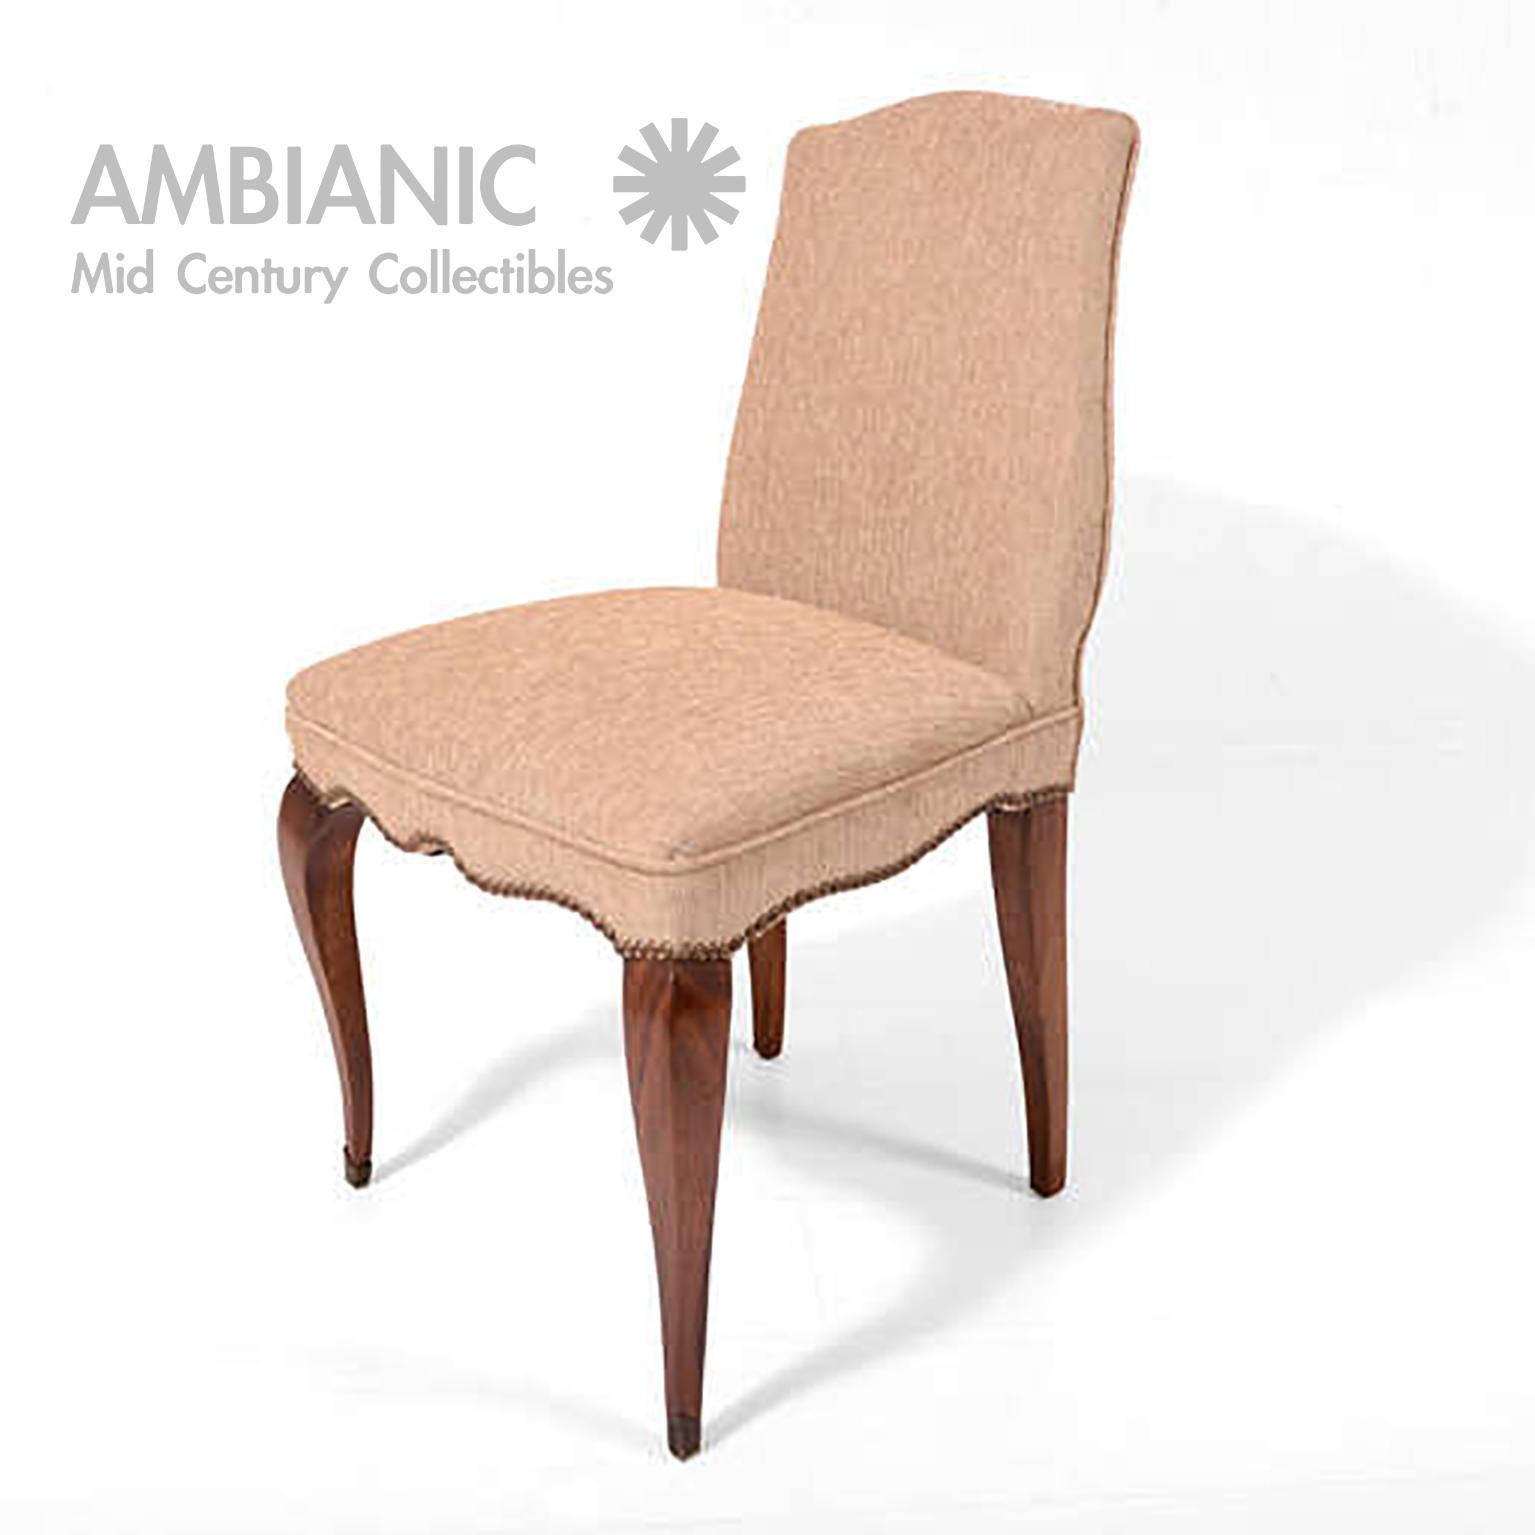 Mid-20th Century Midcentury Mexican Modernist Set of Four Neoclassical Chairs by Arturo Pani